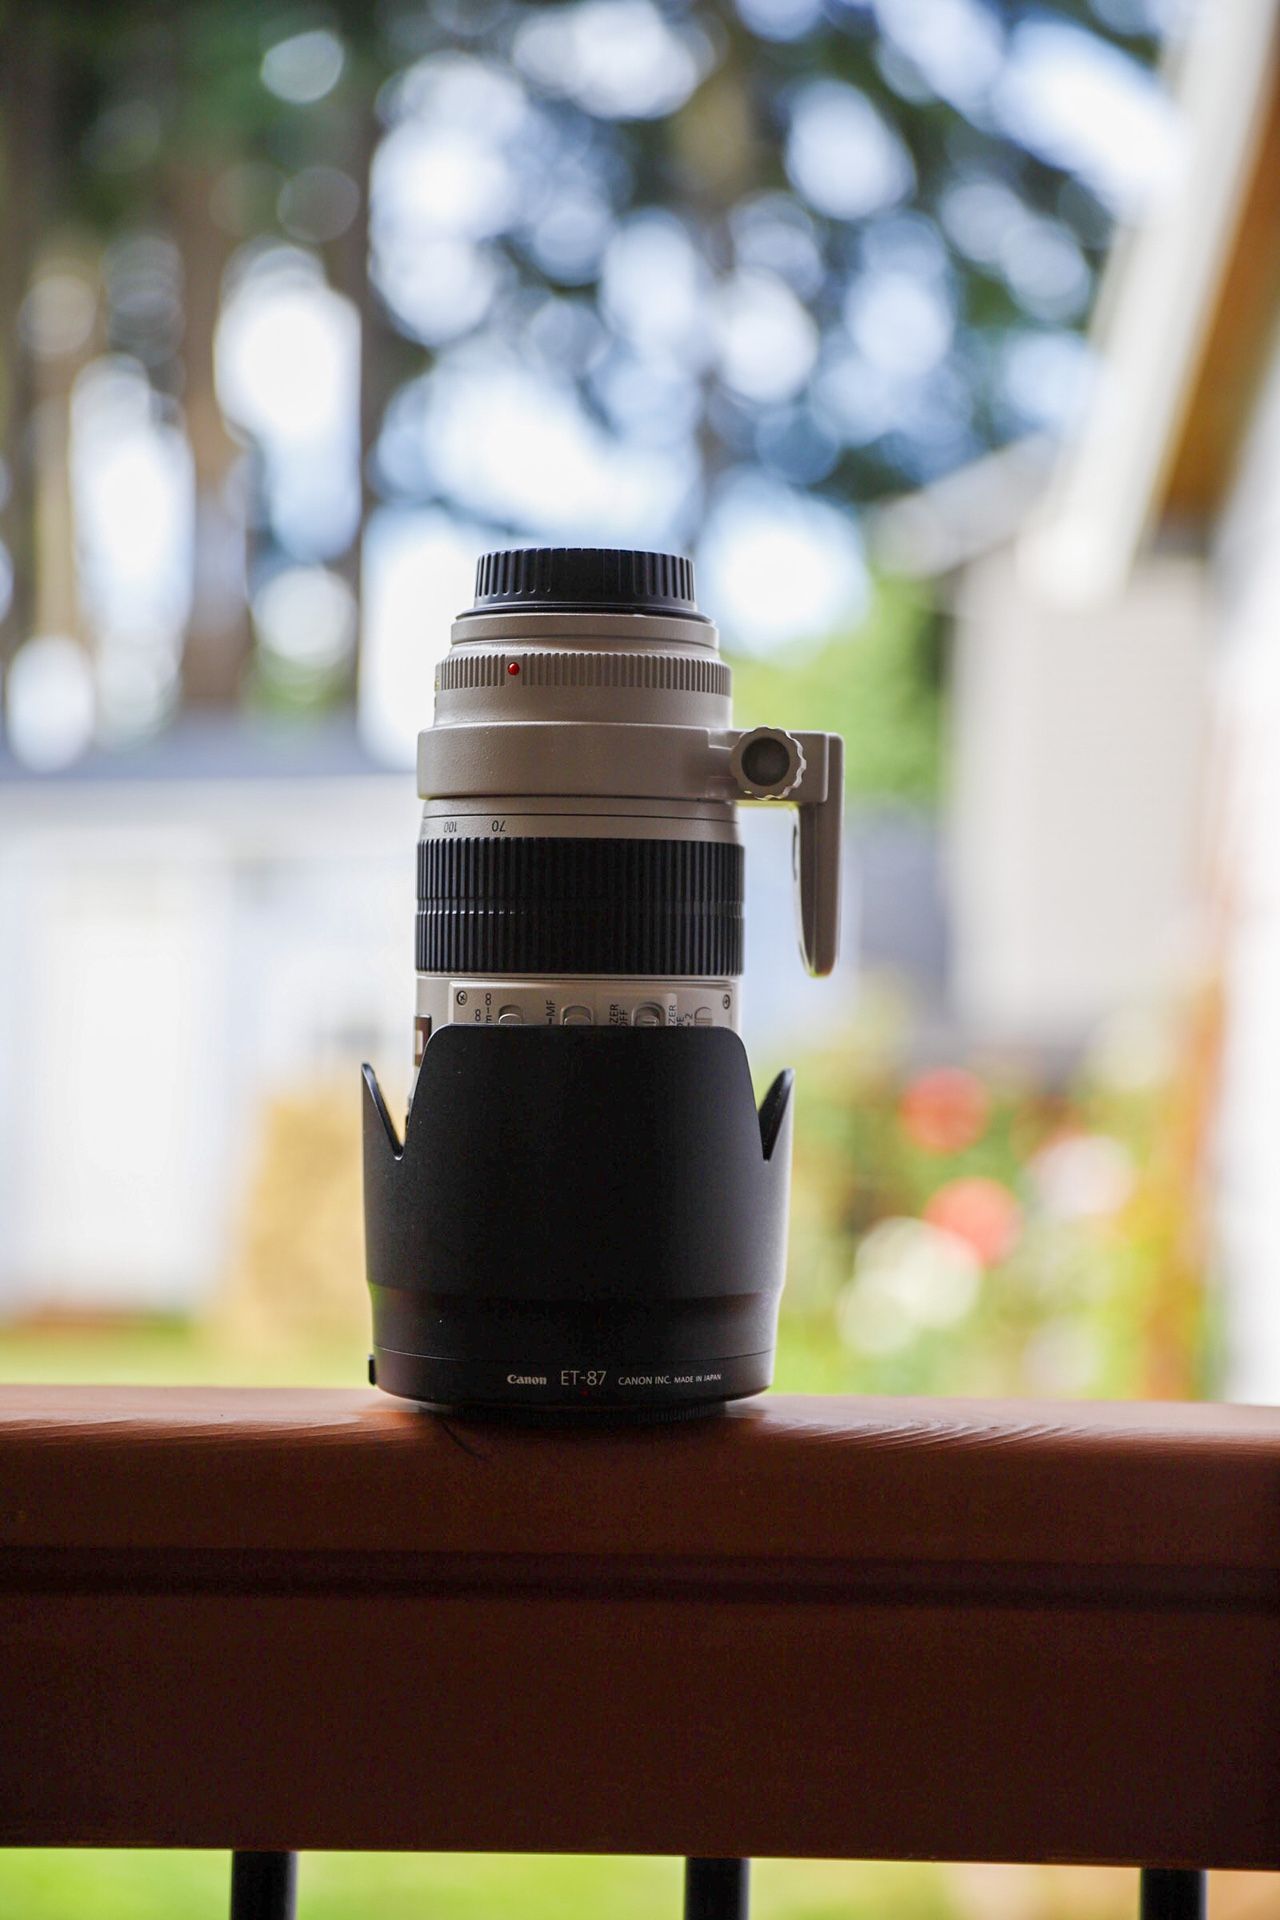 Canon 70-200mm 2.8 ii with IS